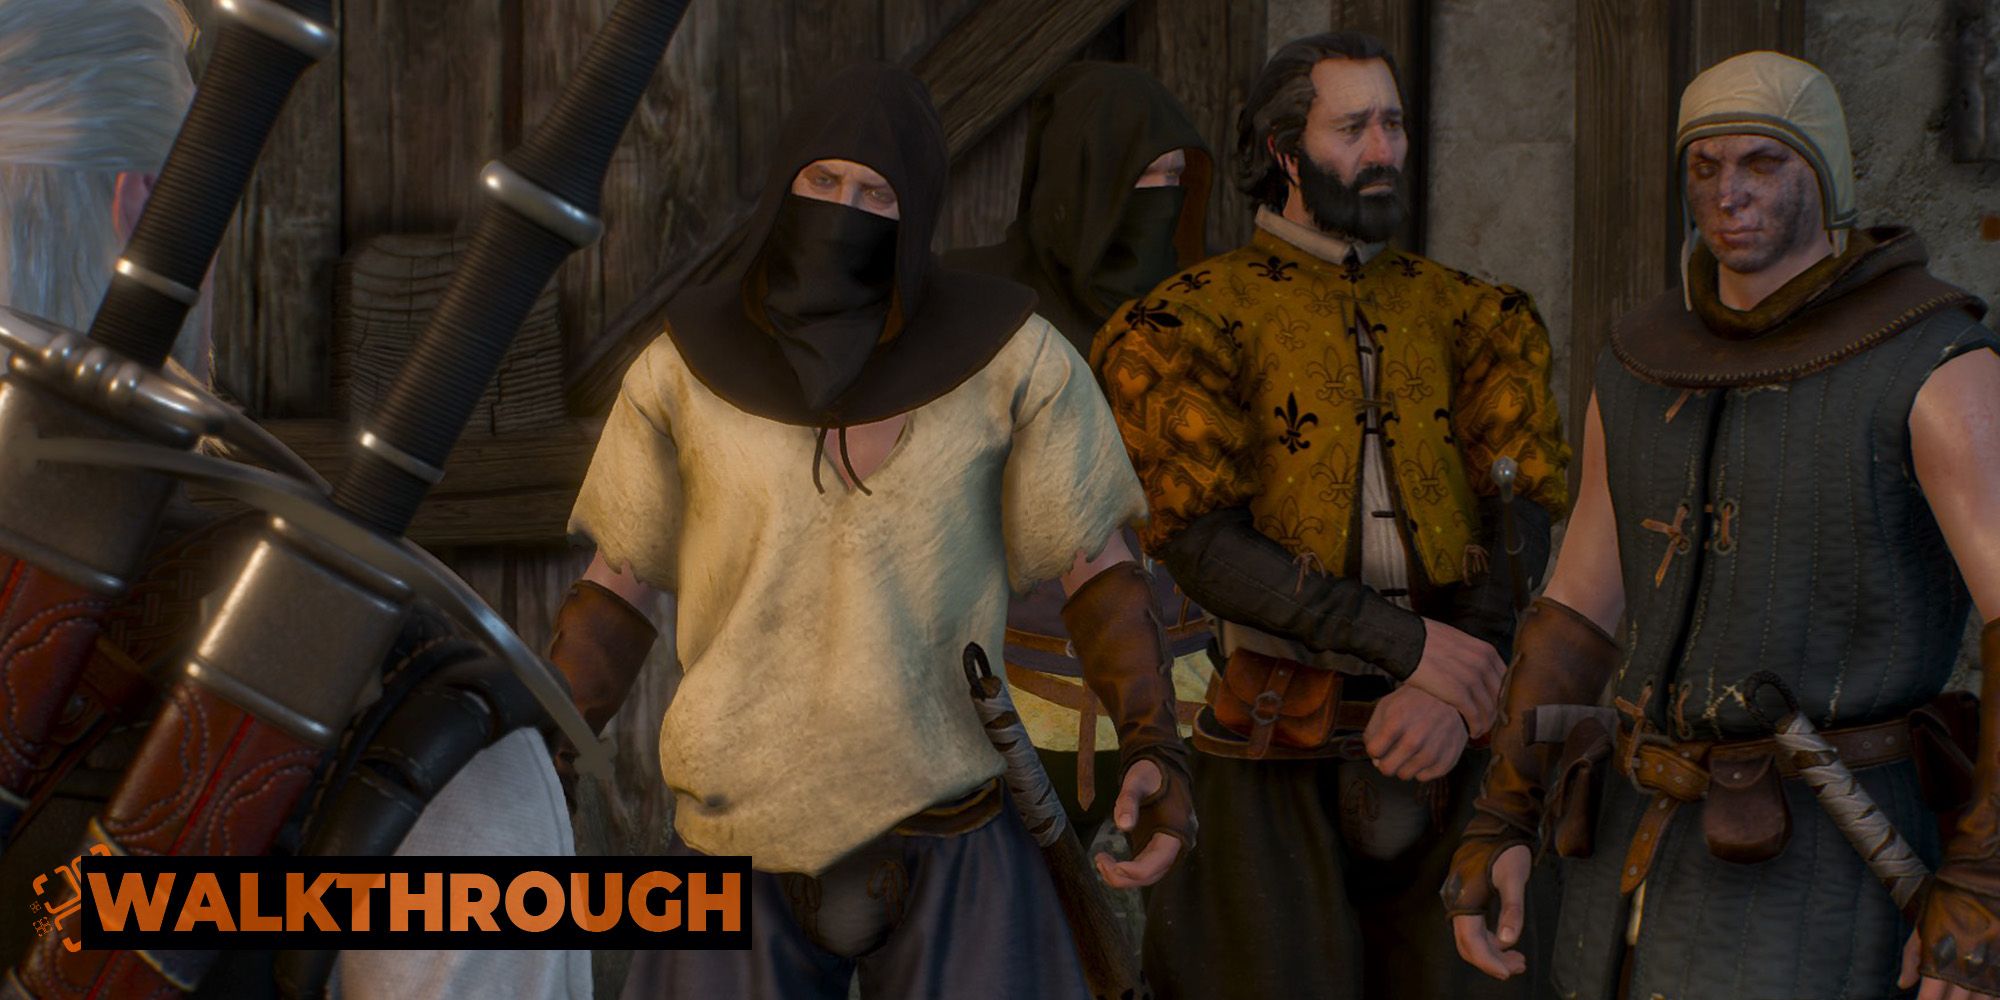 Bandits threaten Geralt as they harass a well-dressed man in Novigrad.